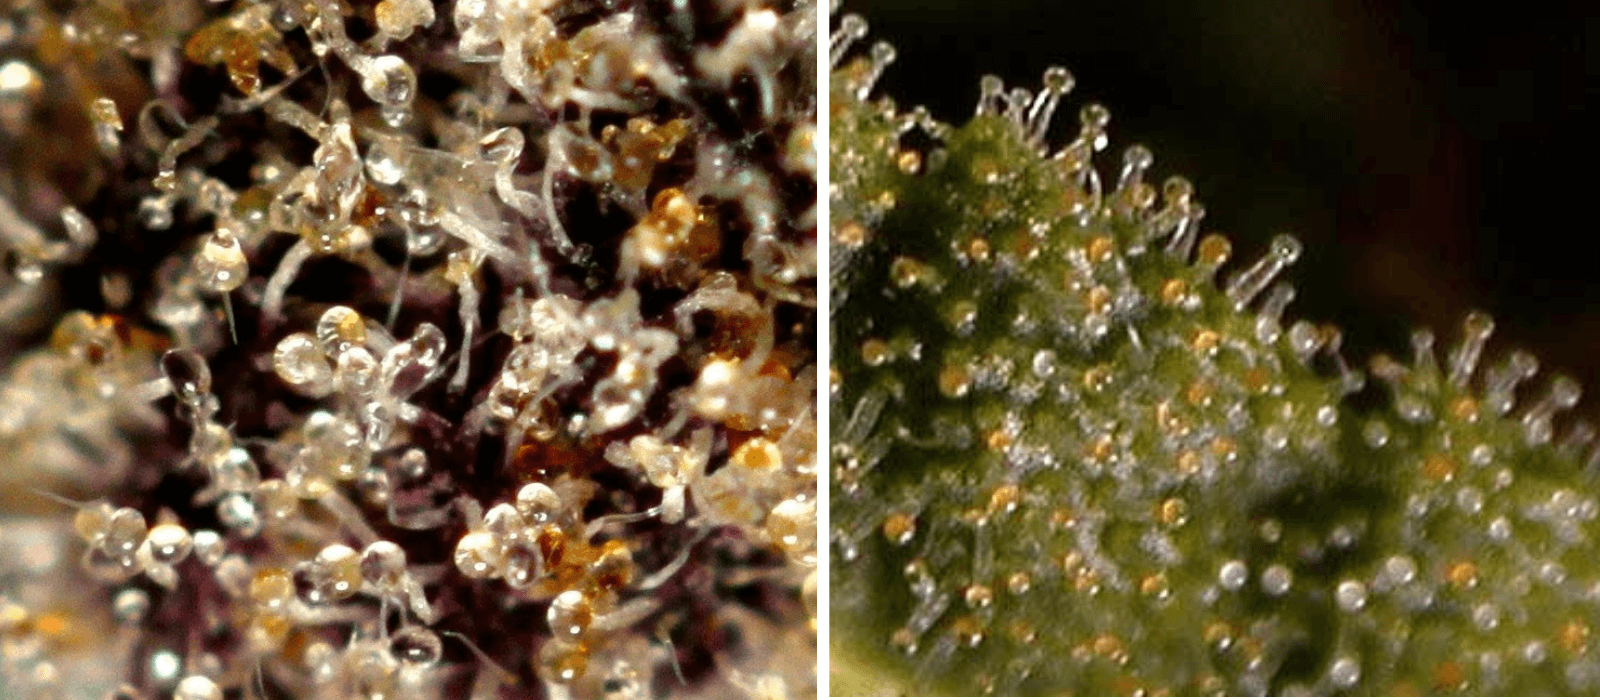 Trichomes at an overripe stage